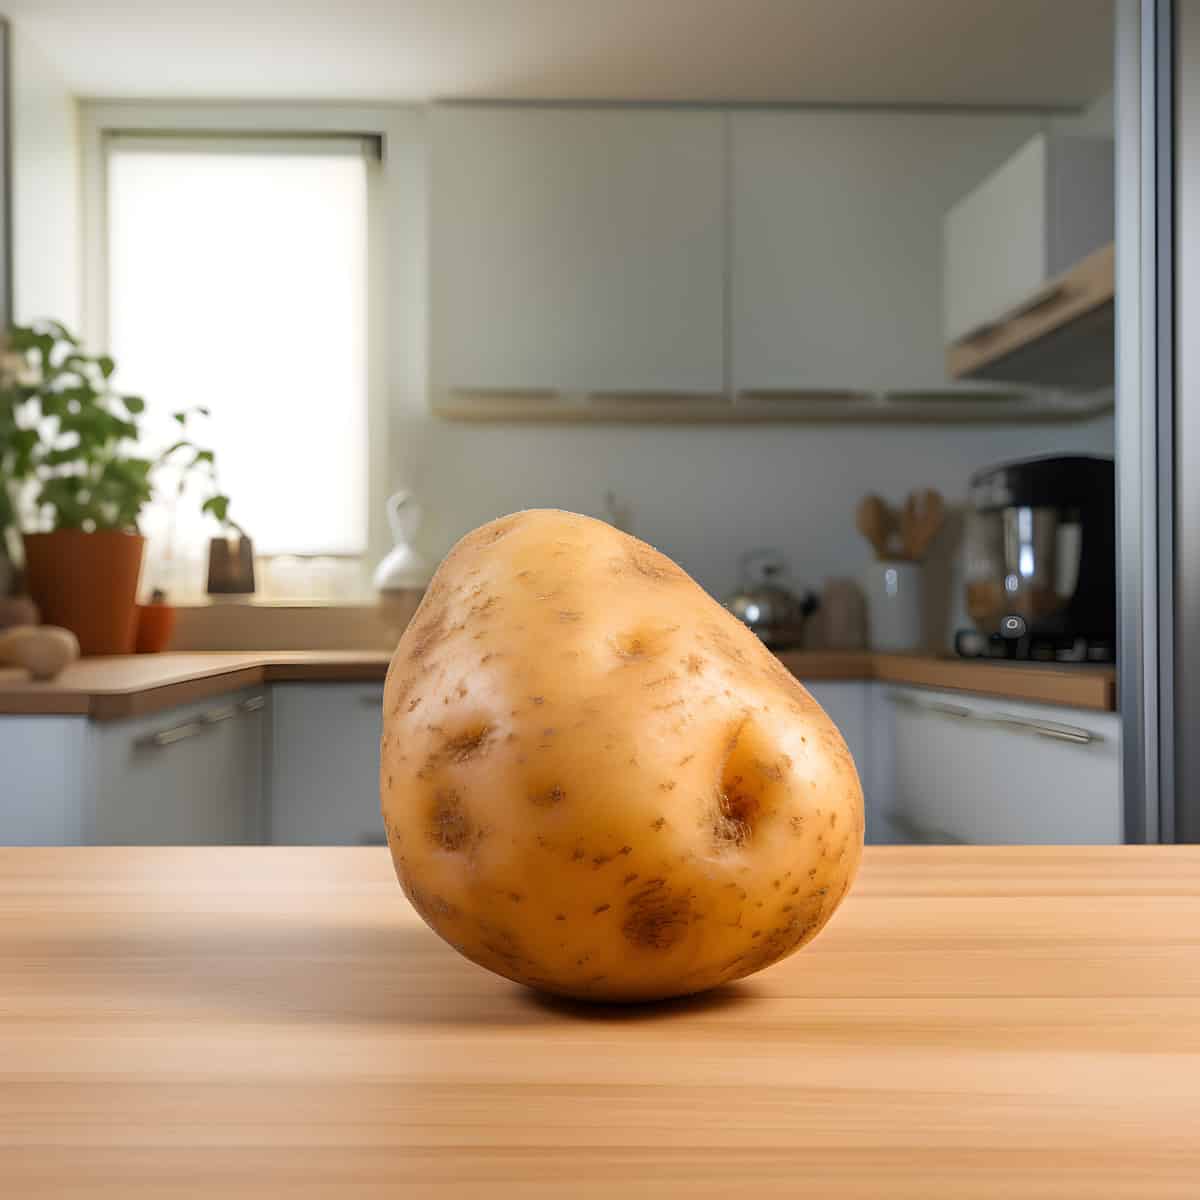 Weiauge Potatoes on a kitchen counter